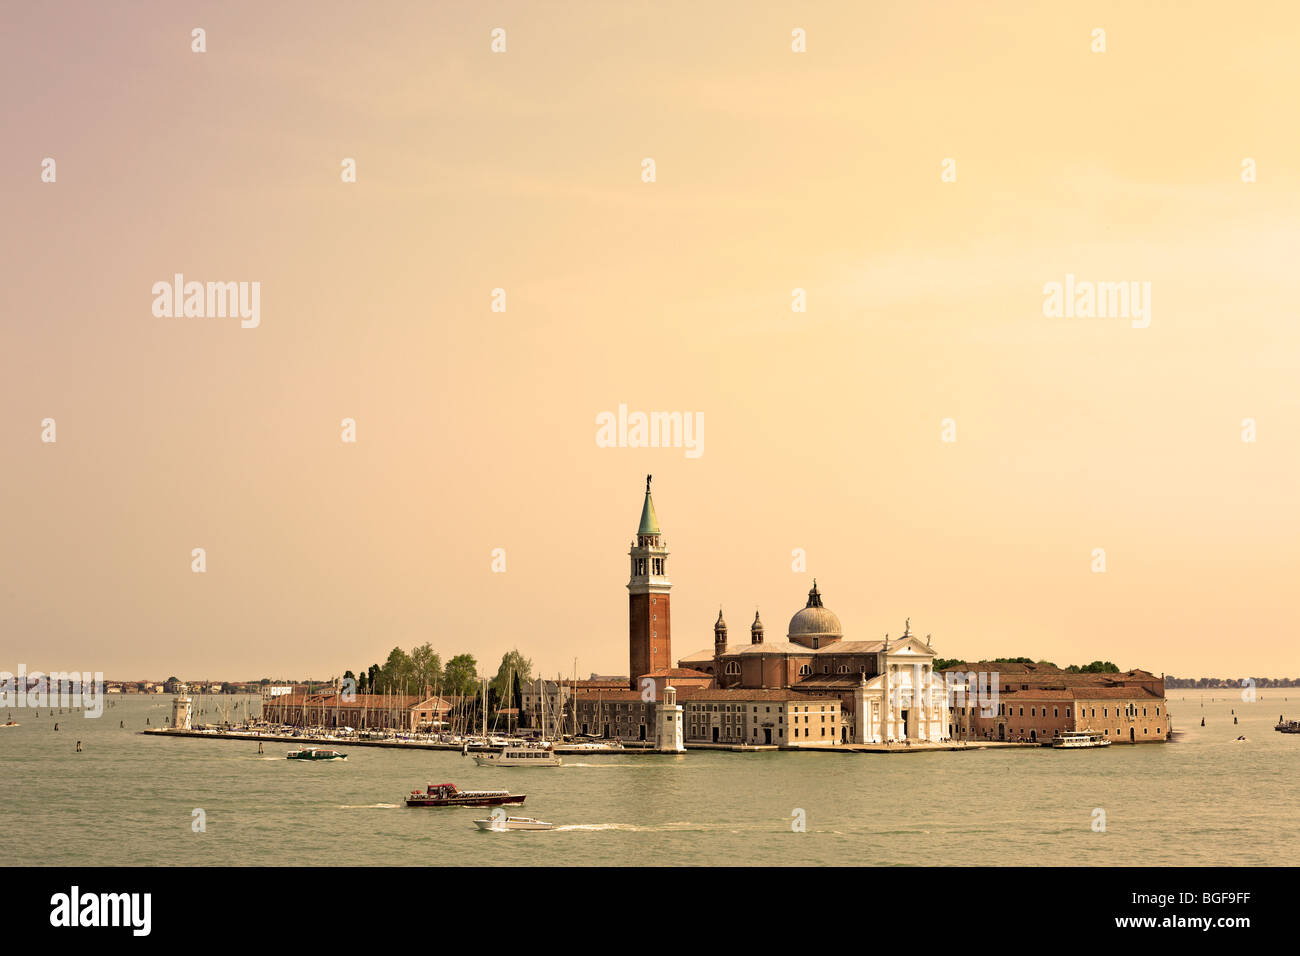 San and Alamy stock images photography at giorgio - dusk hi-res maggiore